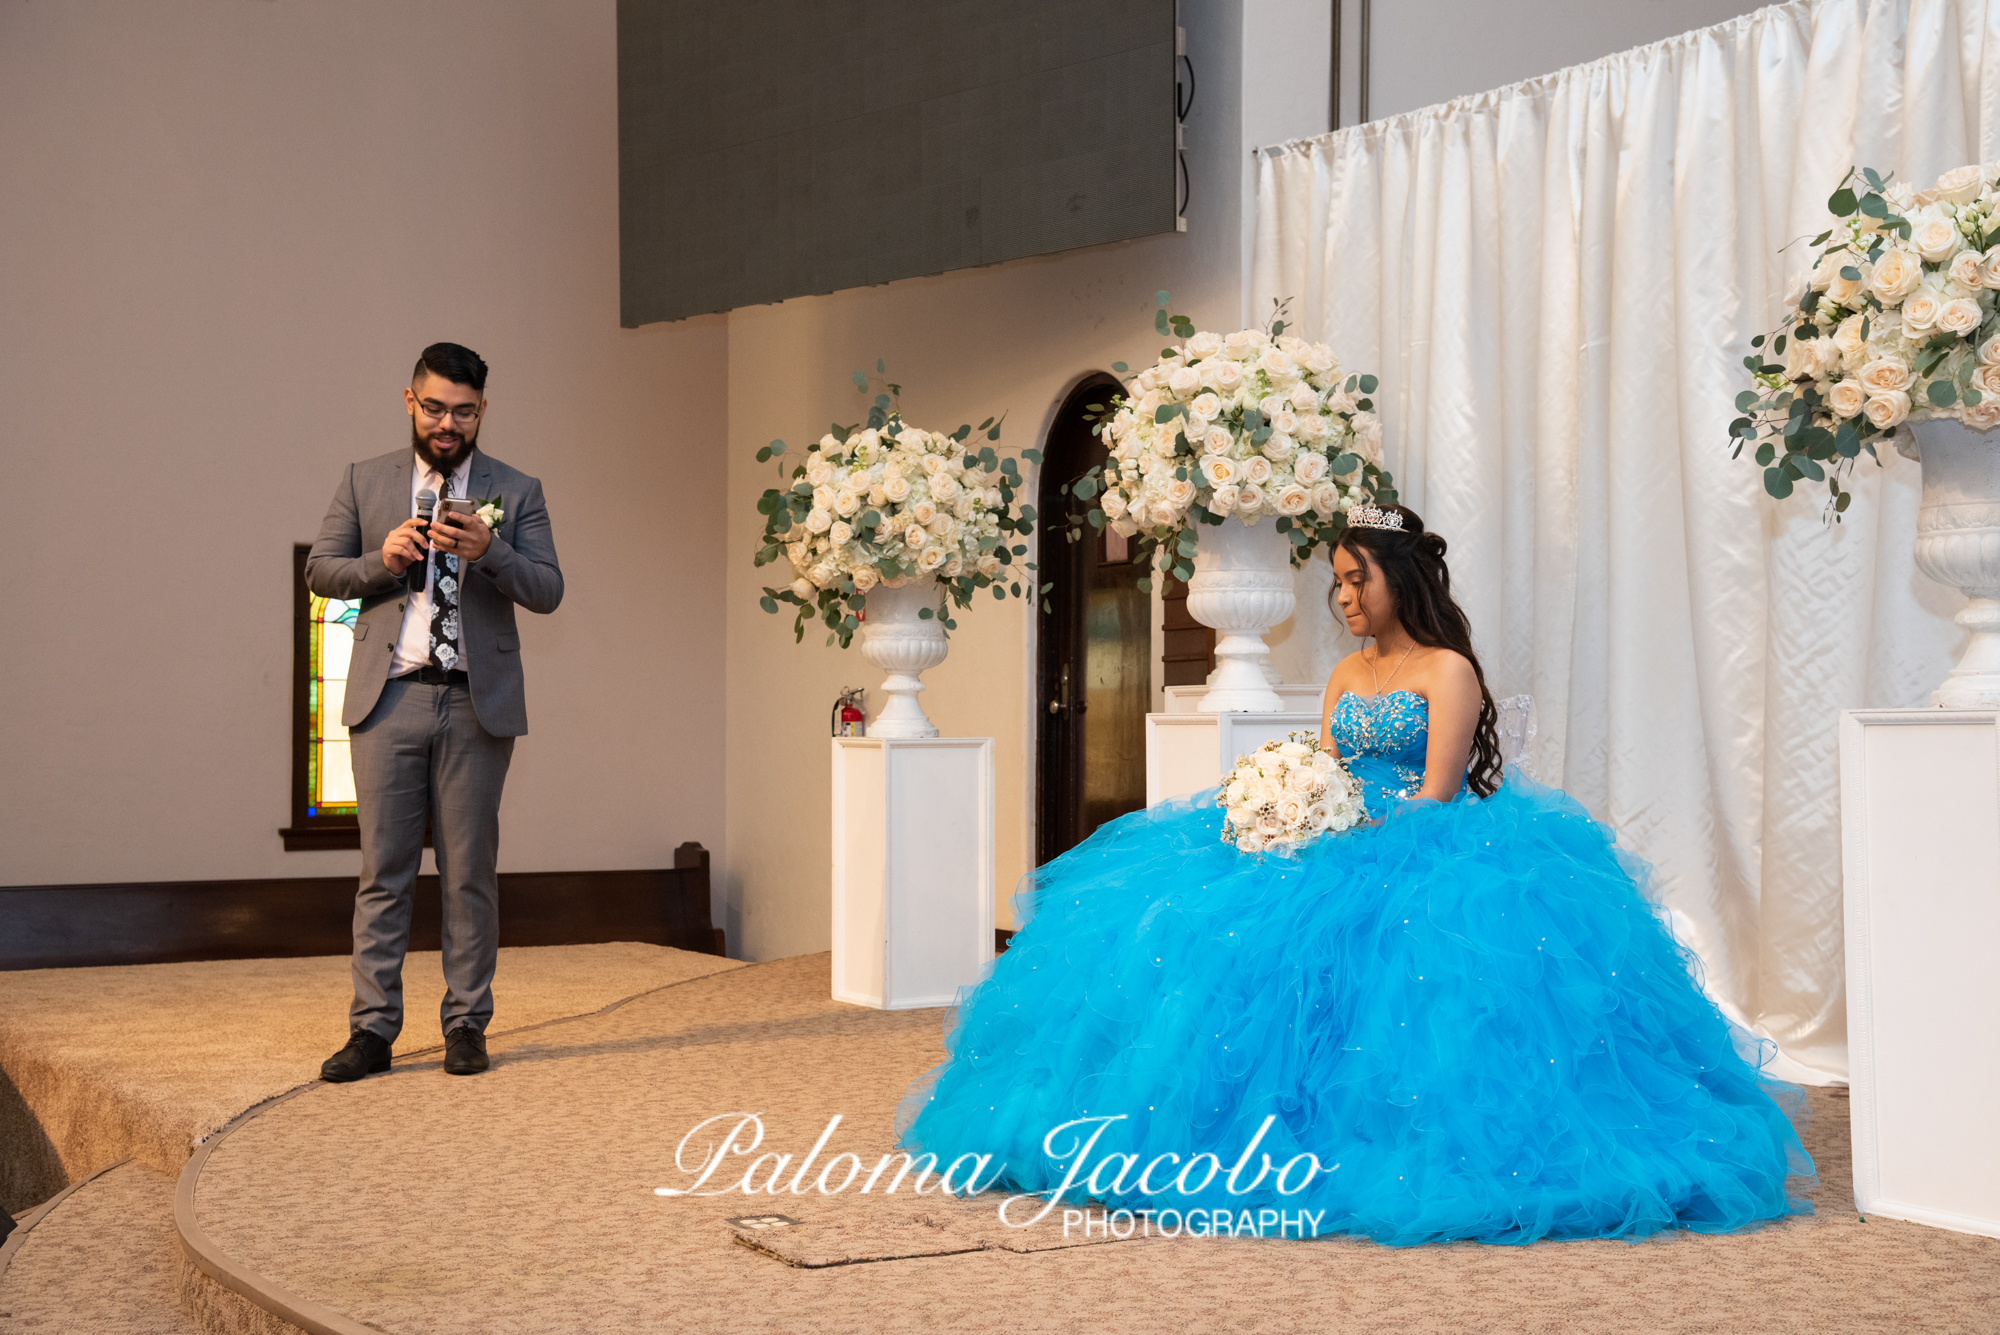 Adventist Quinceanera Ceremony at San Diego Broadway Spanish SDA Church by Paloma Jacobo Photography